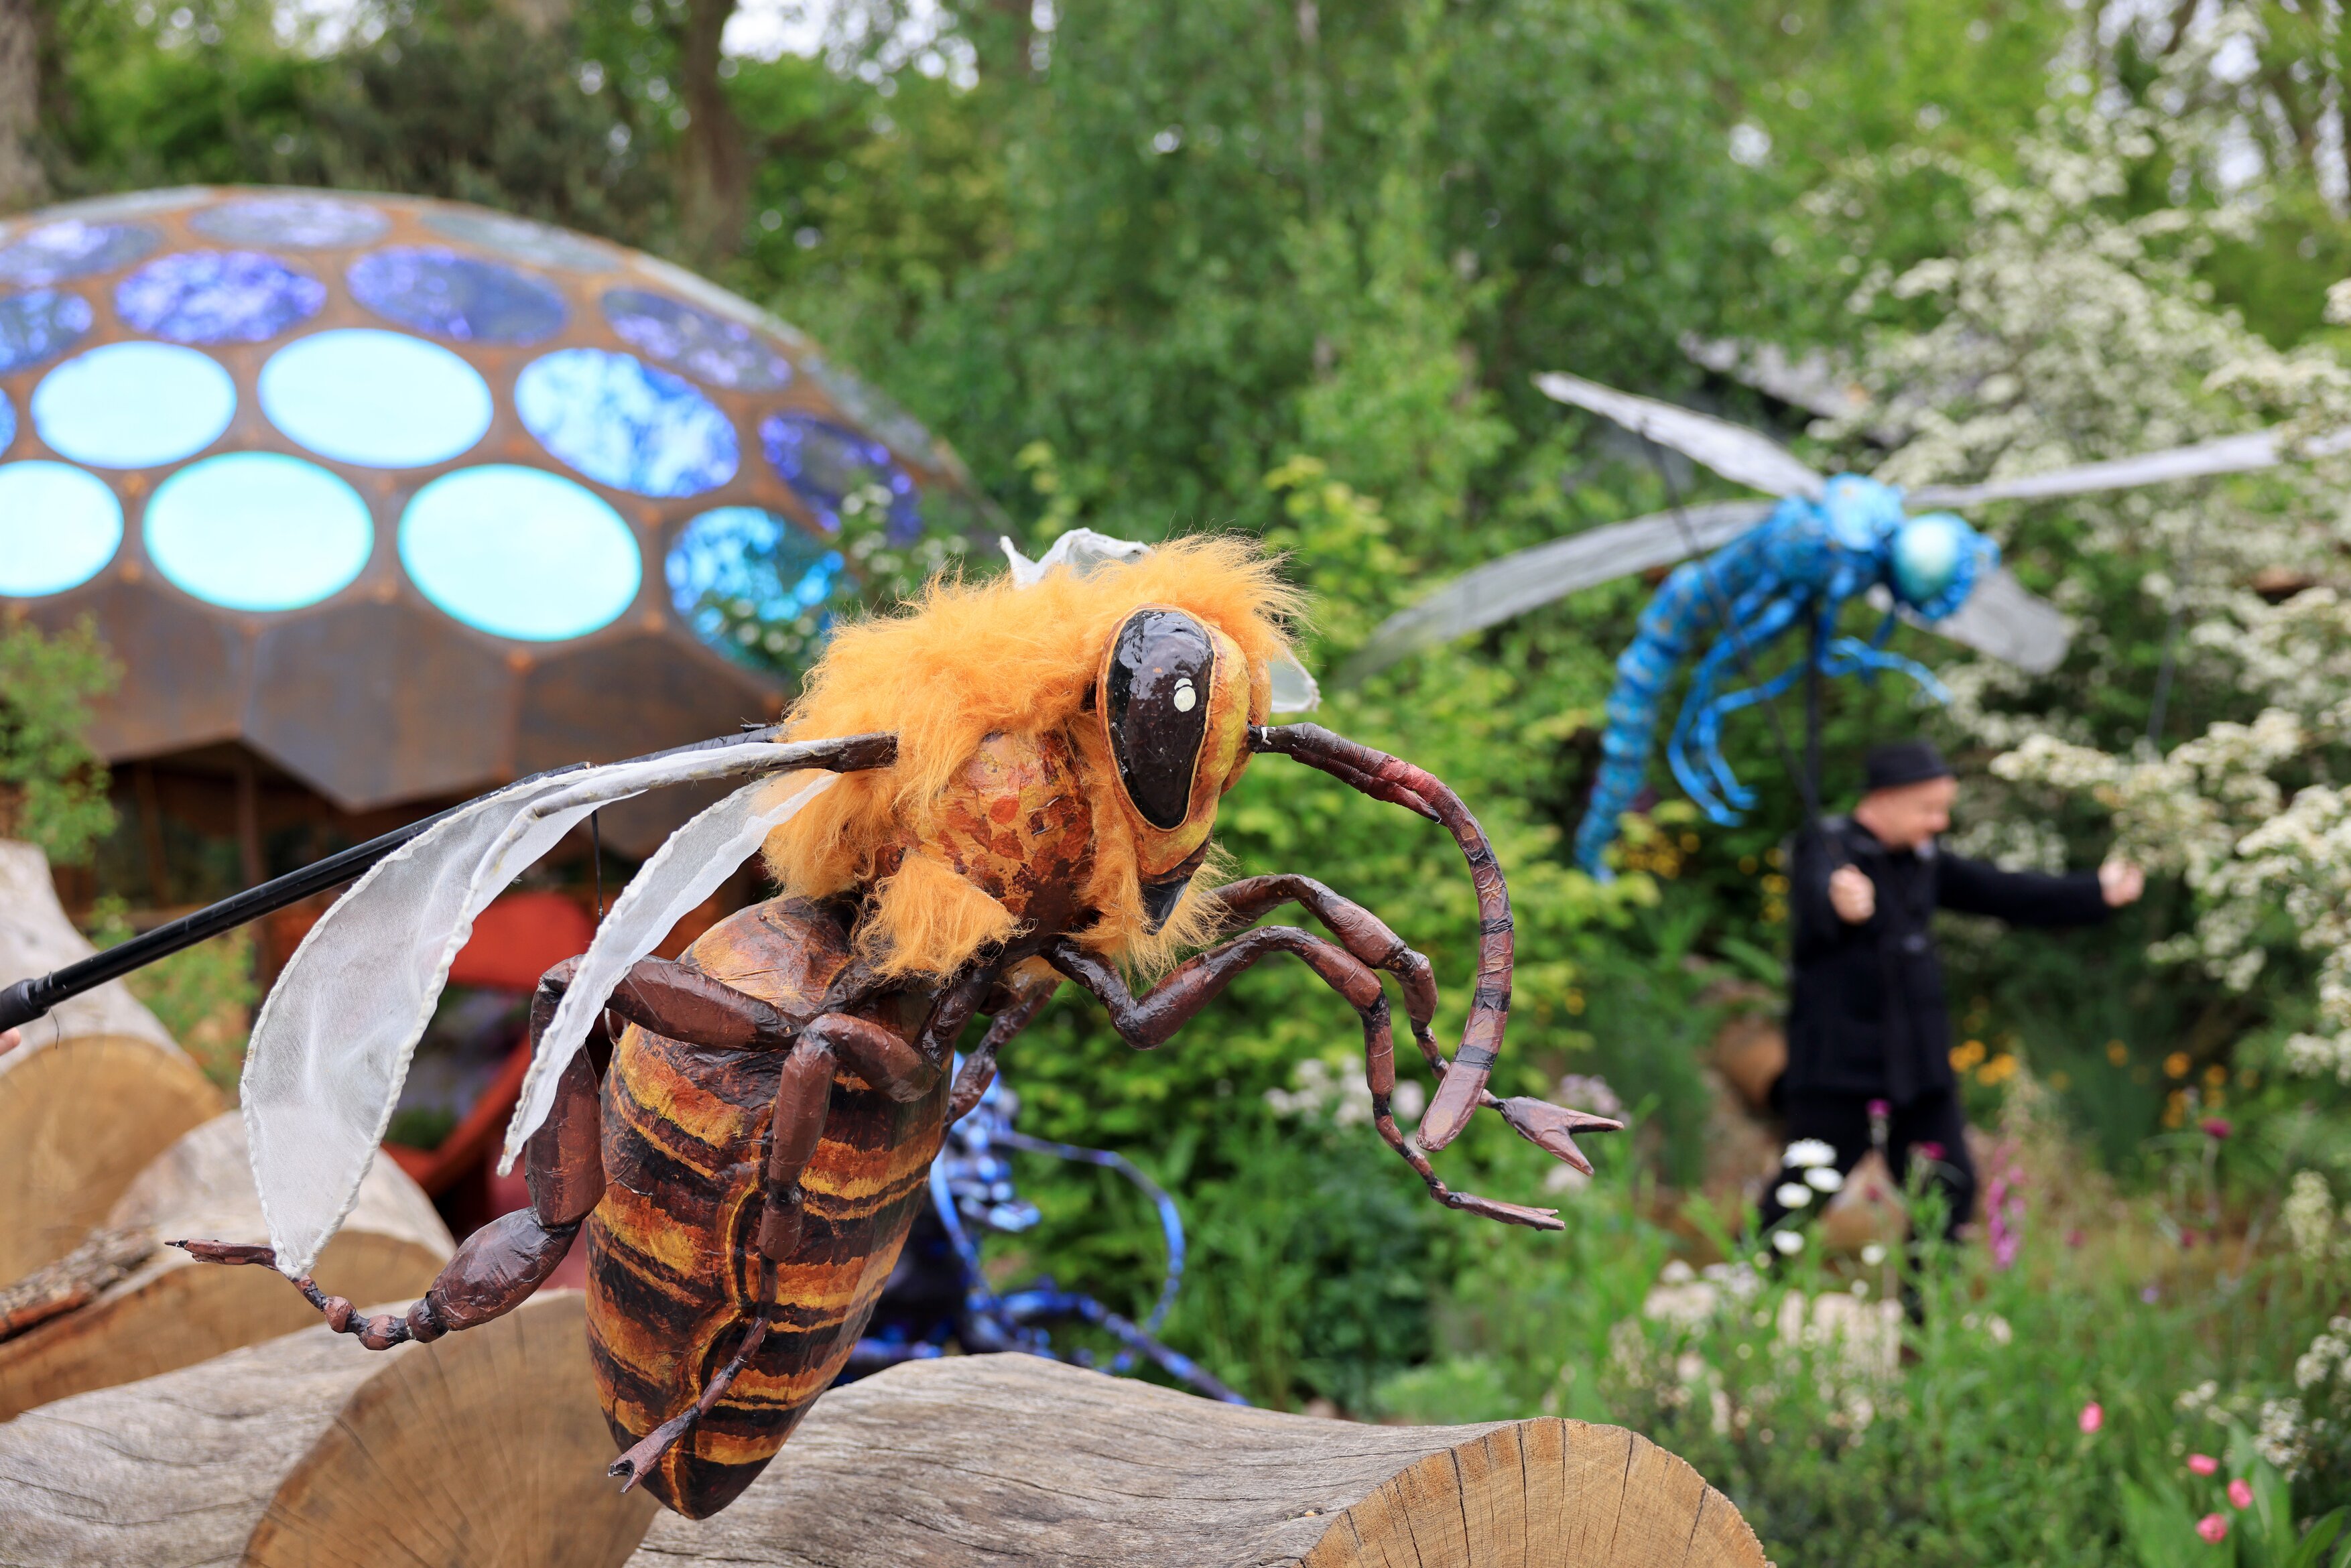 Chelsea Flower Show - Giant fake bee in a garden